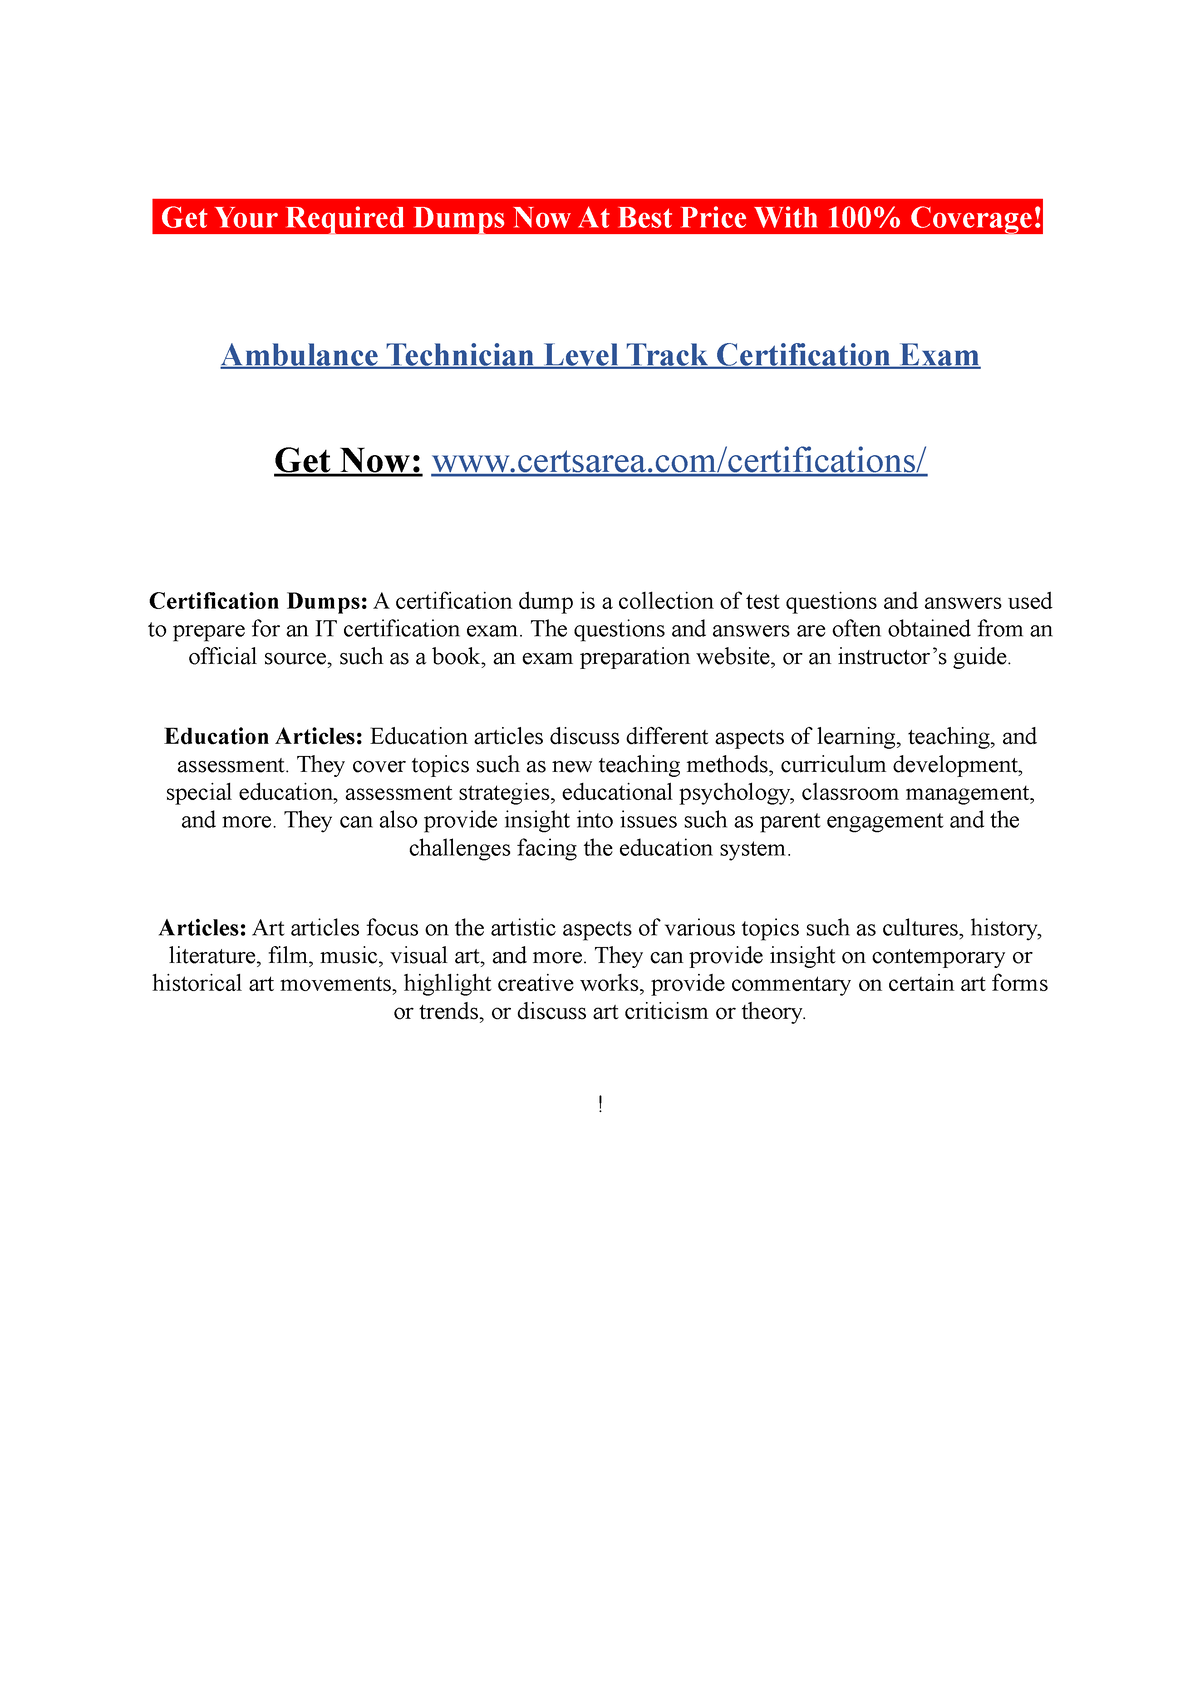 Ambulance Technician Level Track Certification Exam Get Your Required